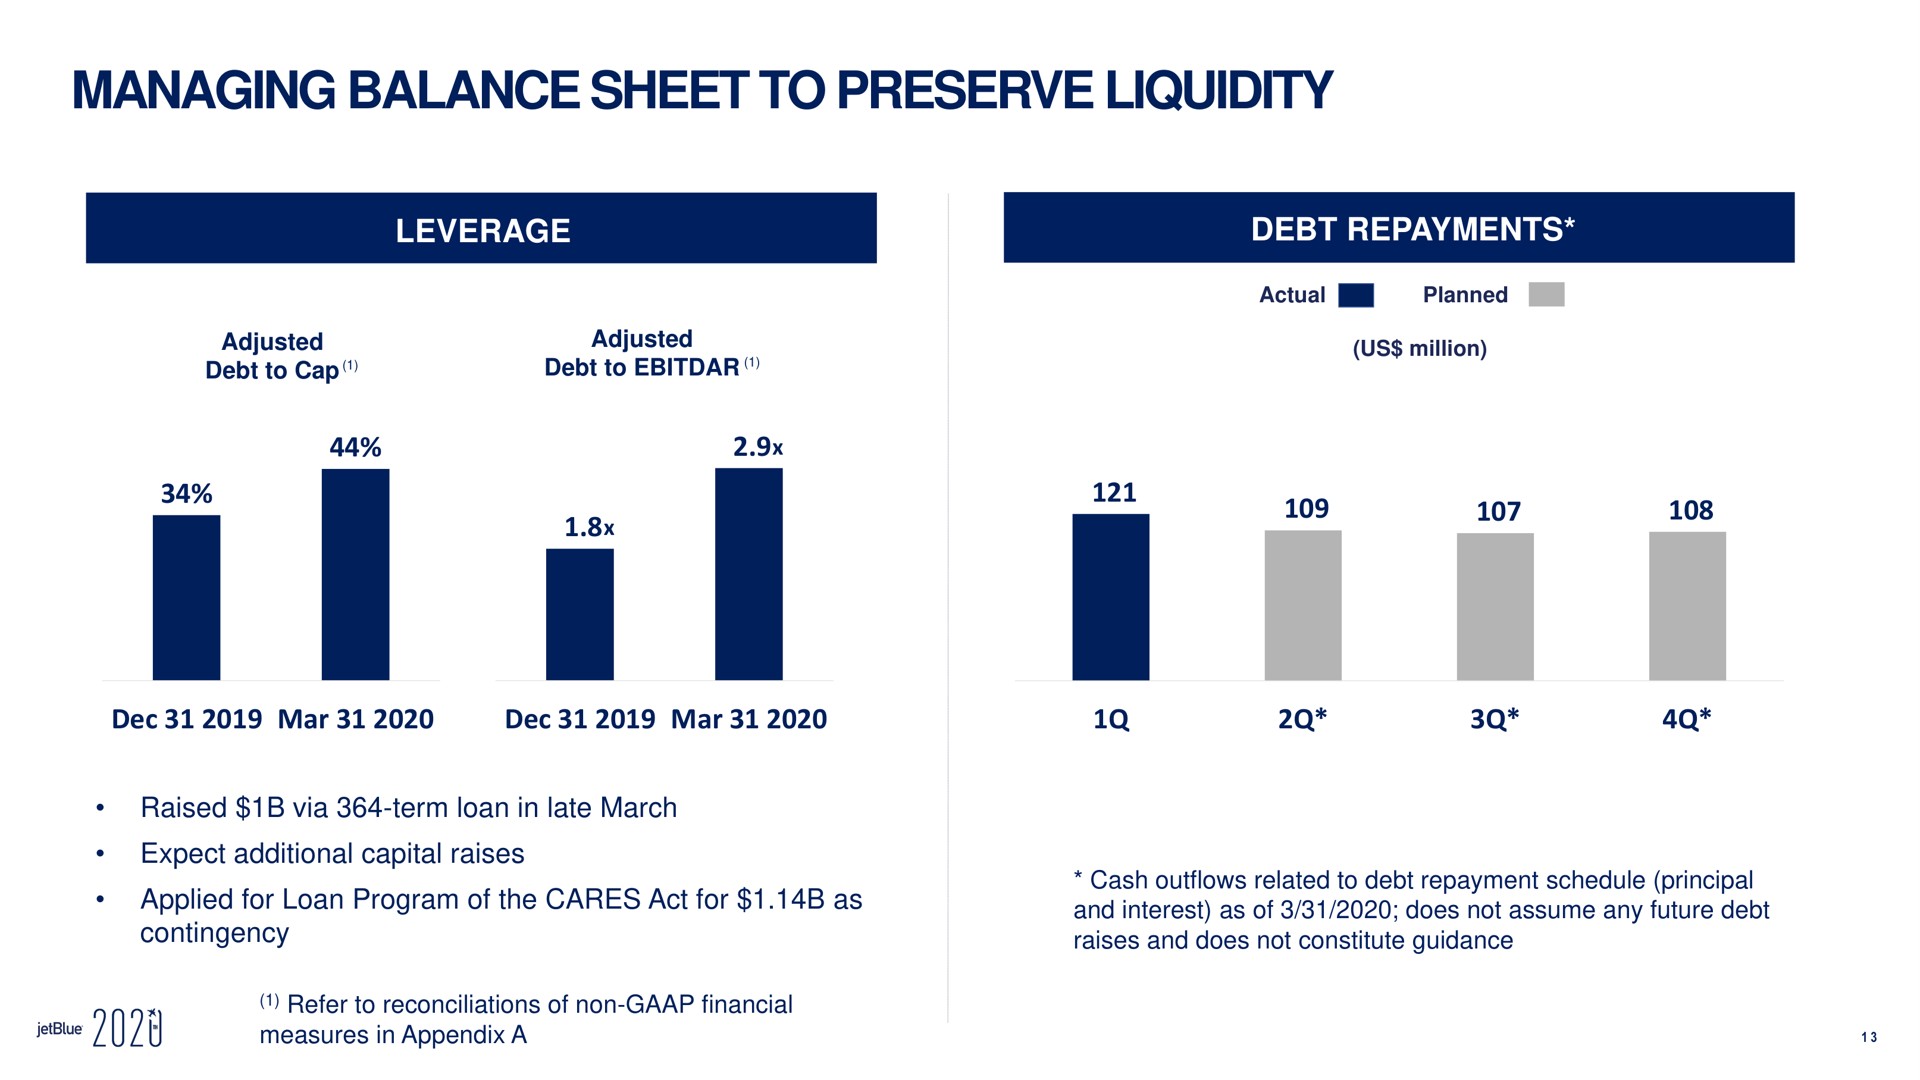 managing balance sheet to preserve liquidity leverage debt repayments debt repayments mar mar raised via term loan in late march expect additional capital raises applied for loan program of the cares act for as contingency i a fee i measures appendix a | jetBlue